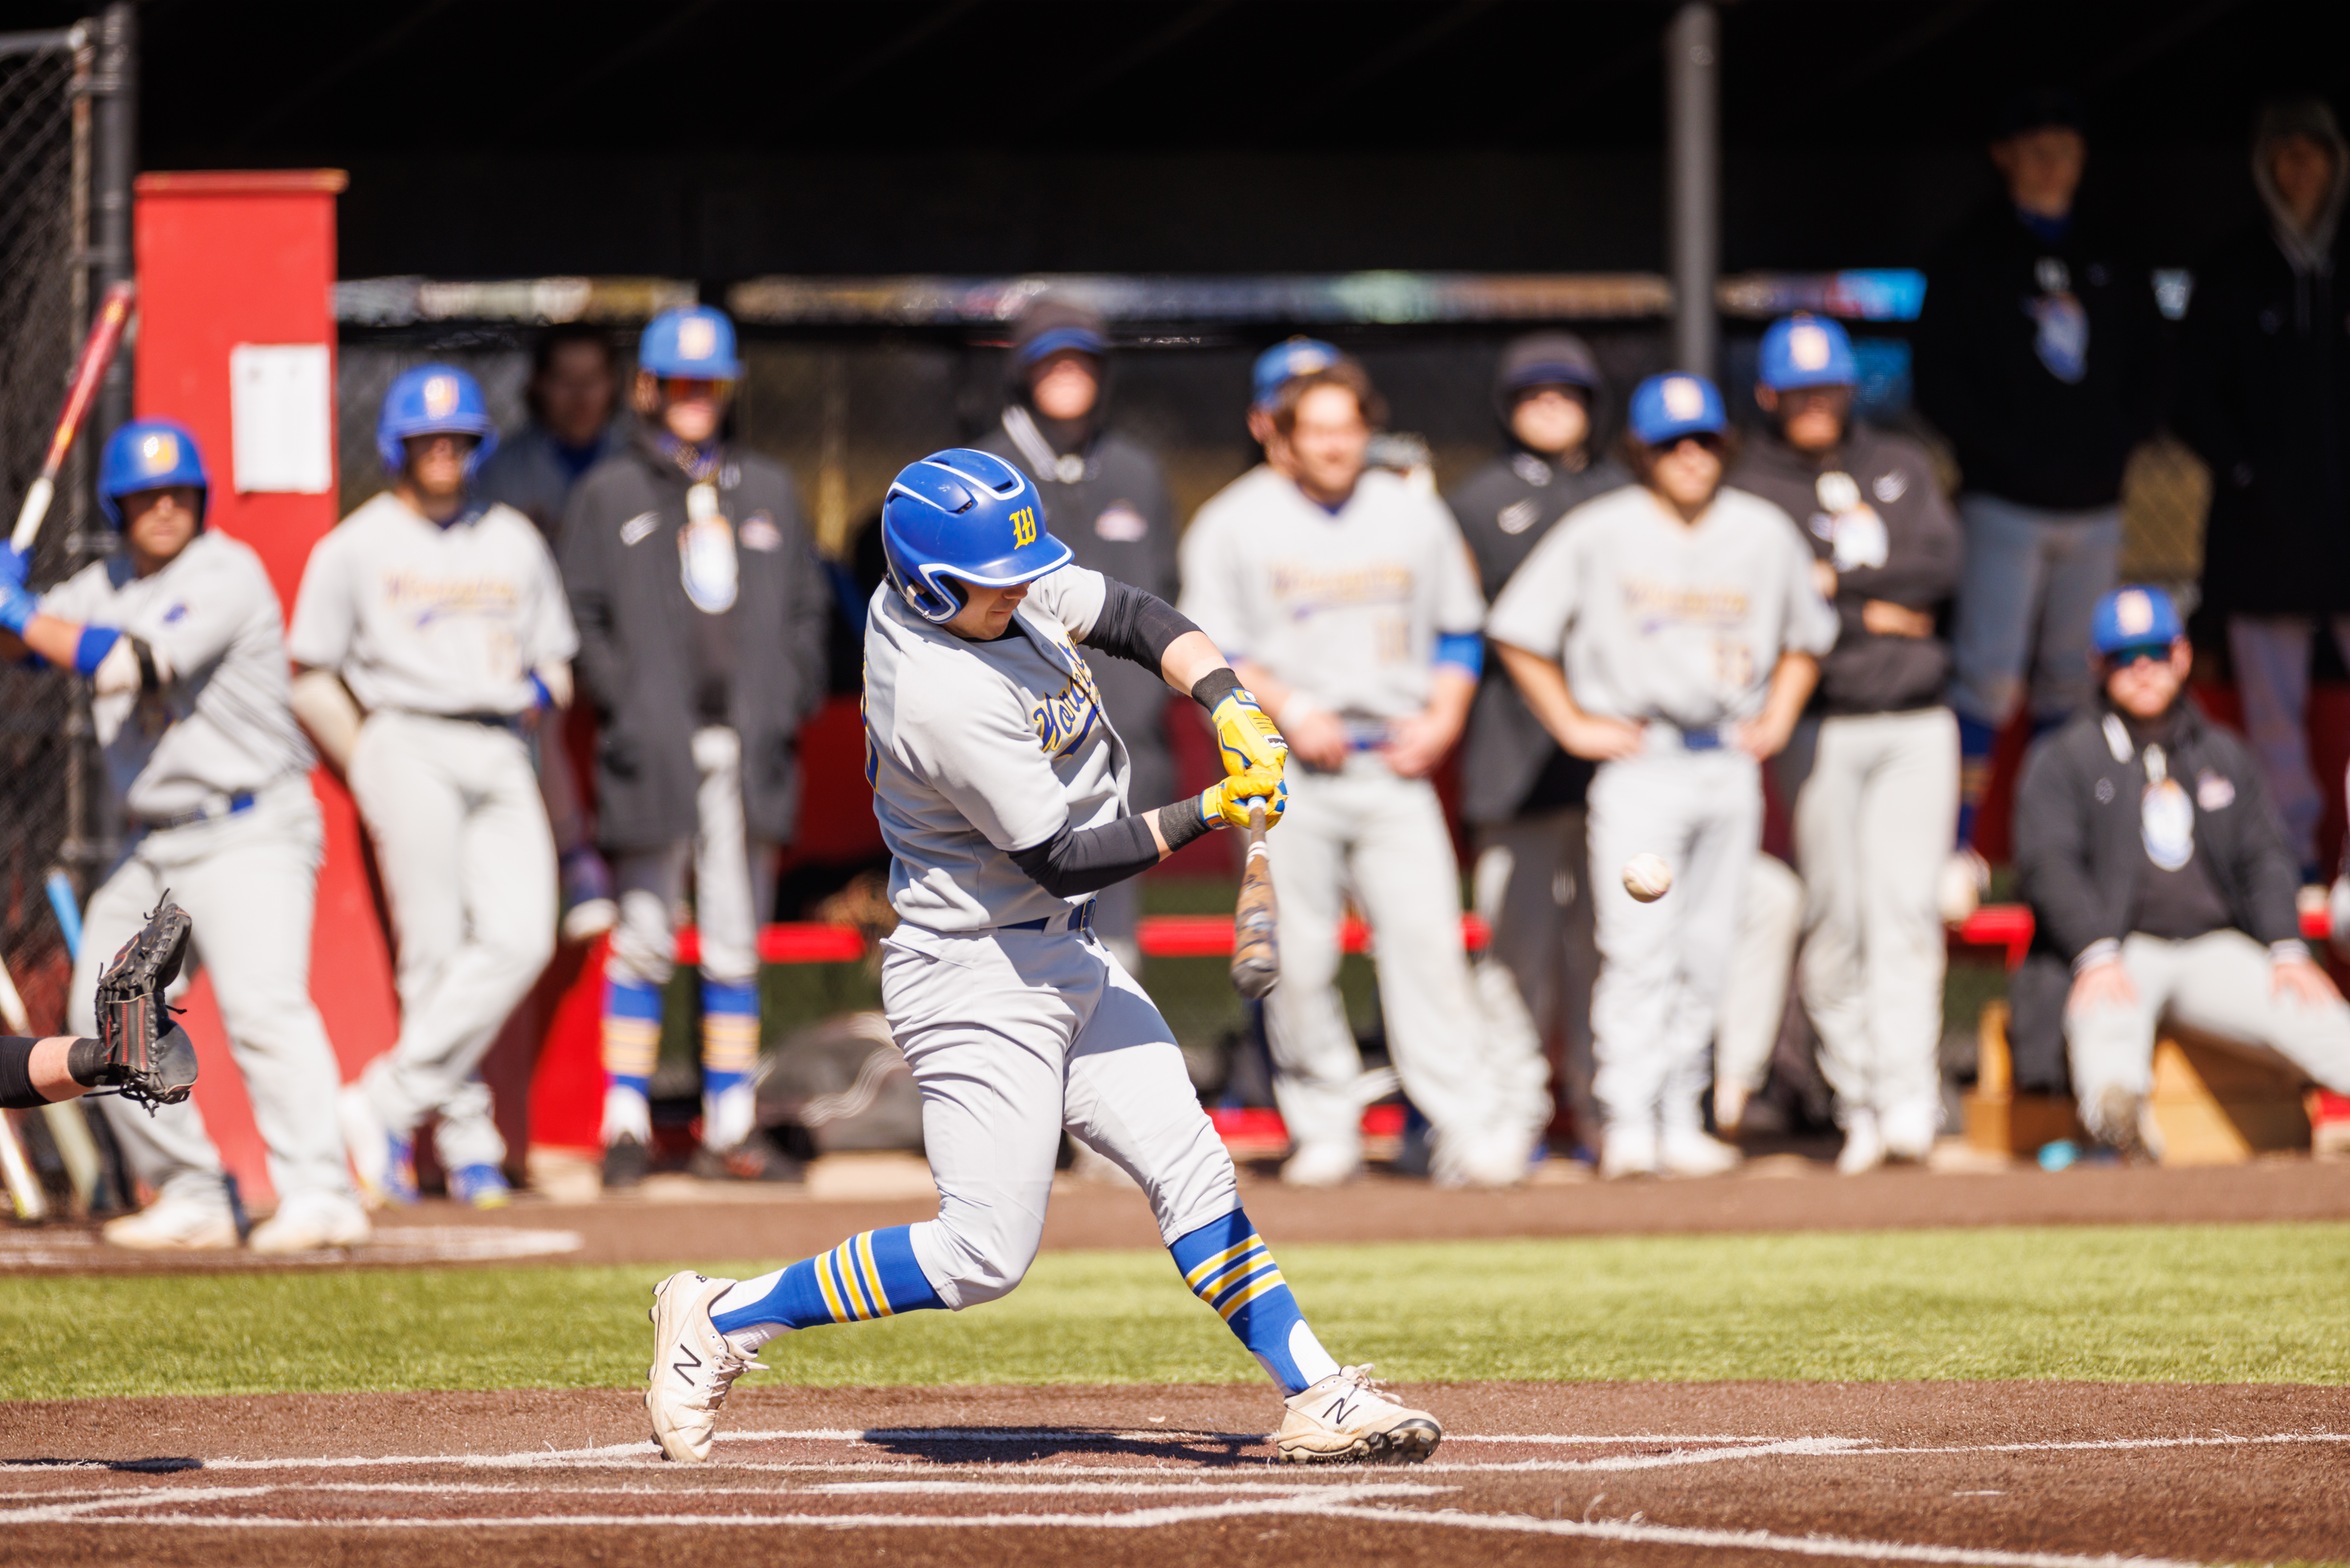 One Big Inning Not Enough for Lancers  to Topple MCLA